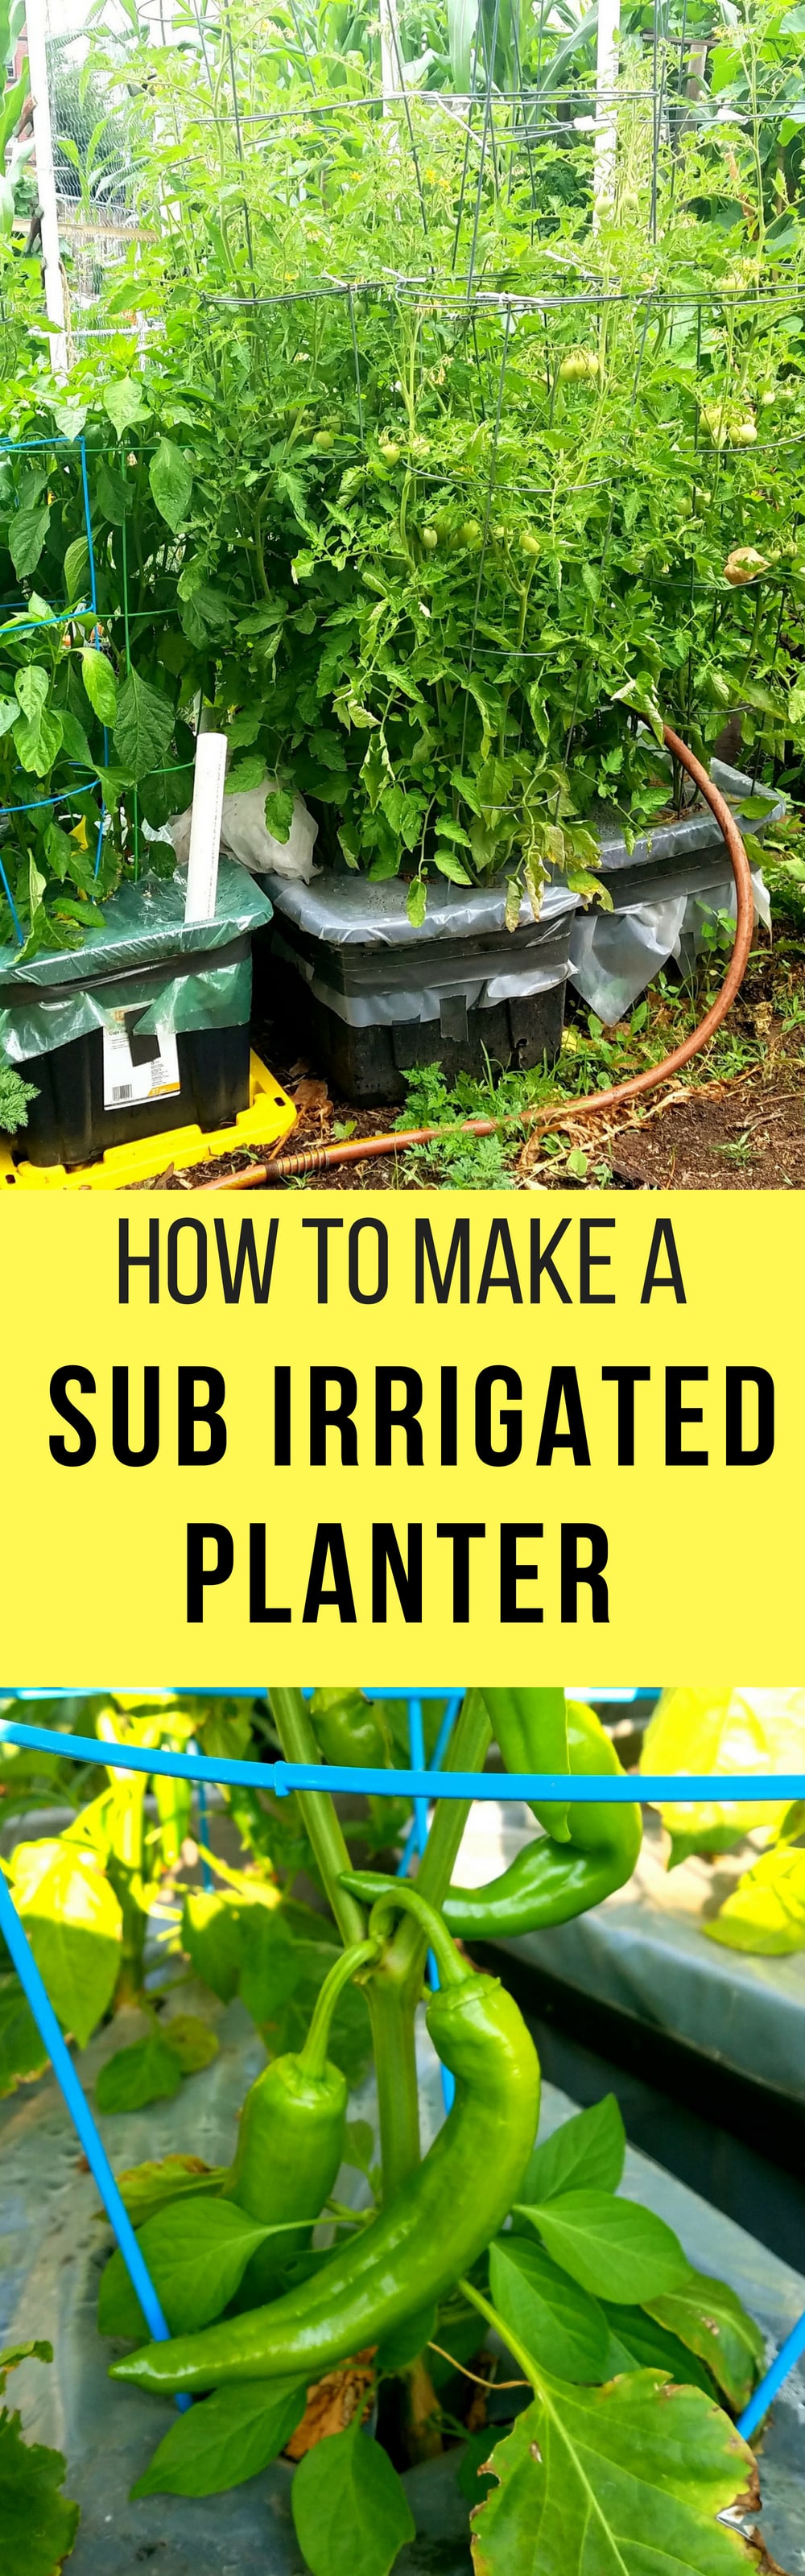 How To Make a Sub Irrigated Planter! We grow HUNDREDS of pounds of vegetables in our planters! Follow these easy DIY step by step instructions on how to make your own container garden. These planters are perfect for gardens of any size, and they're cheap to make!